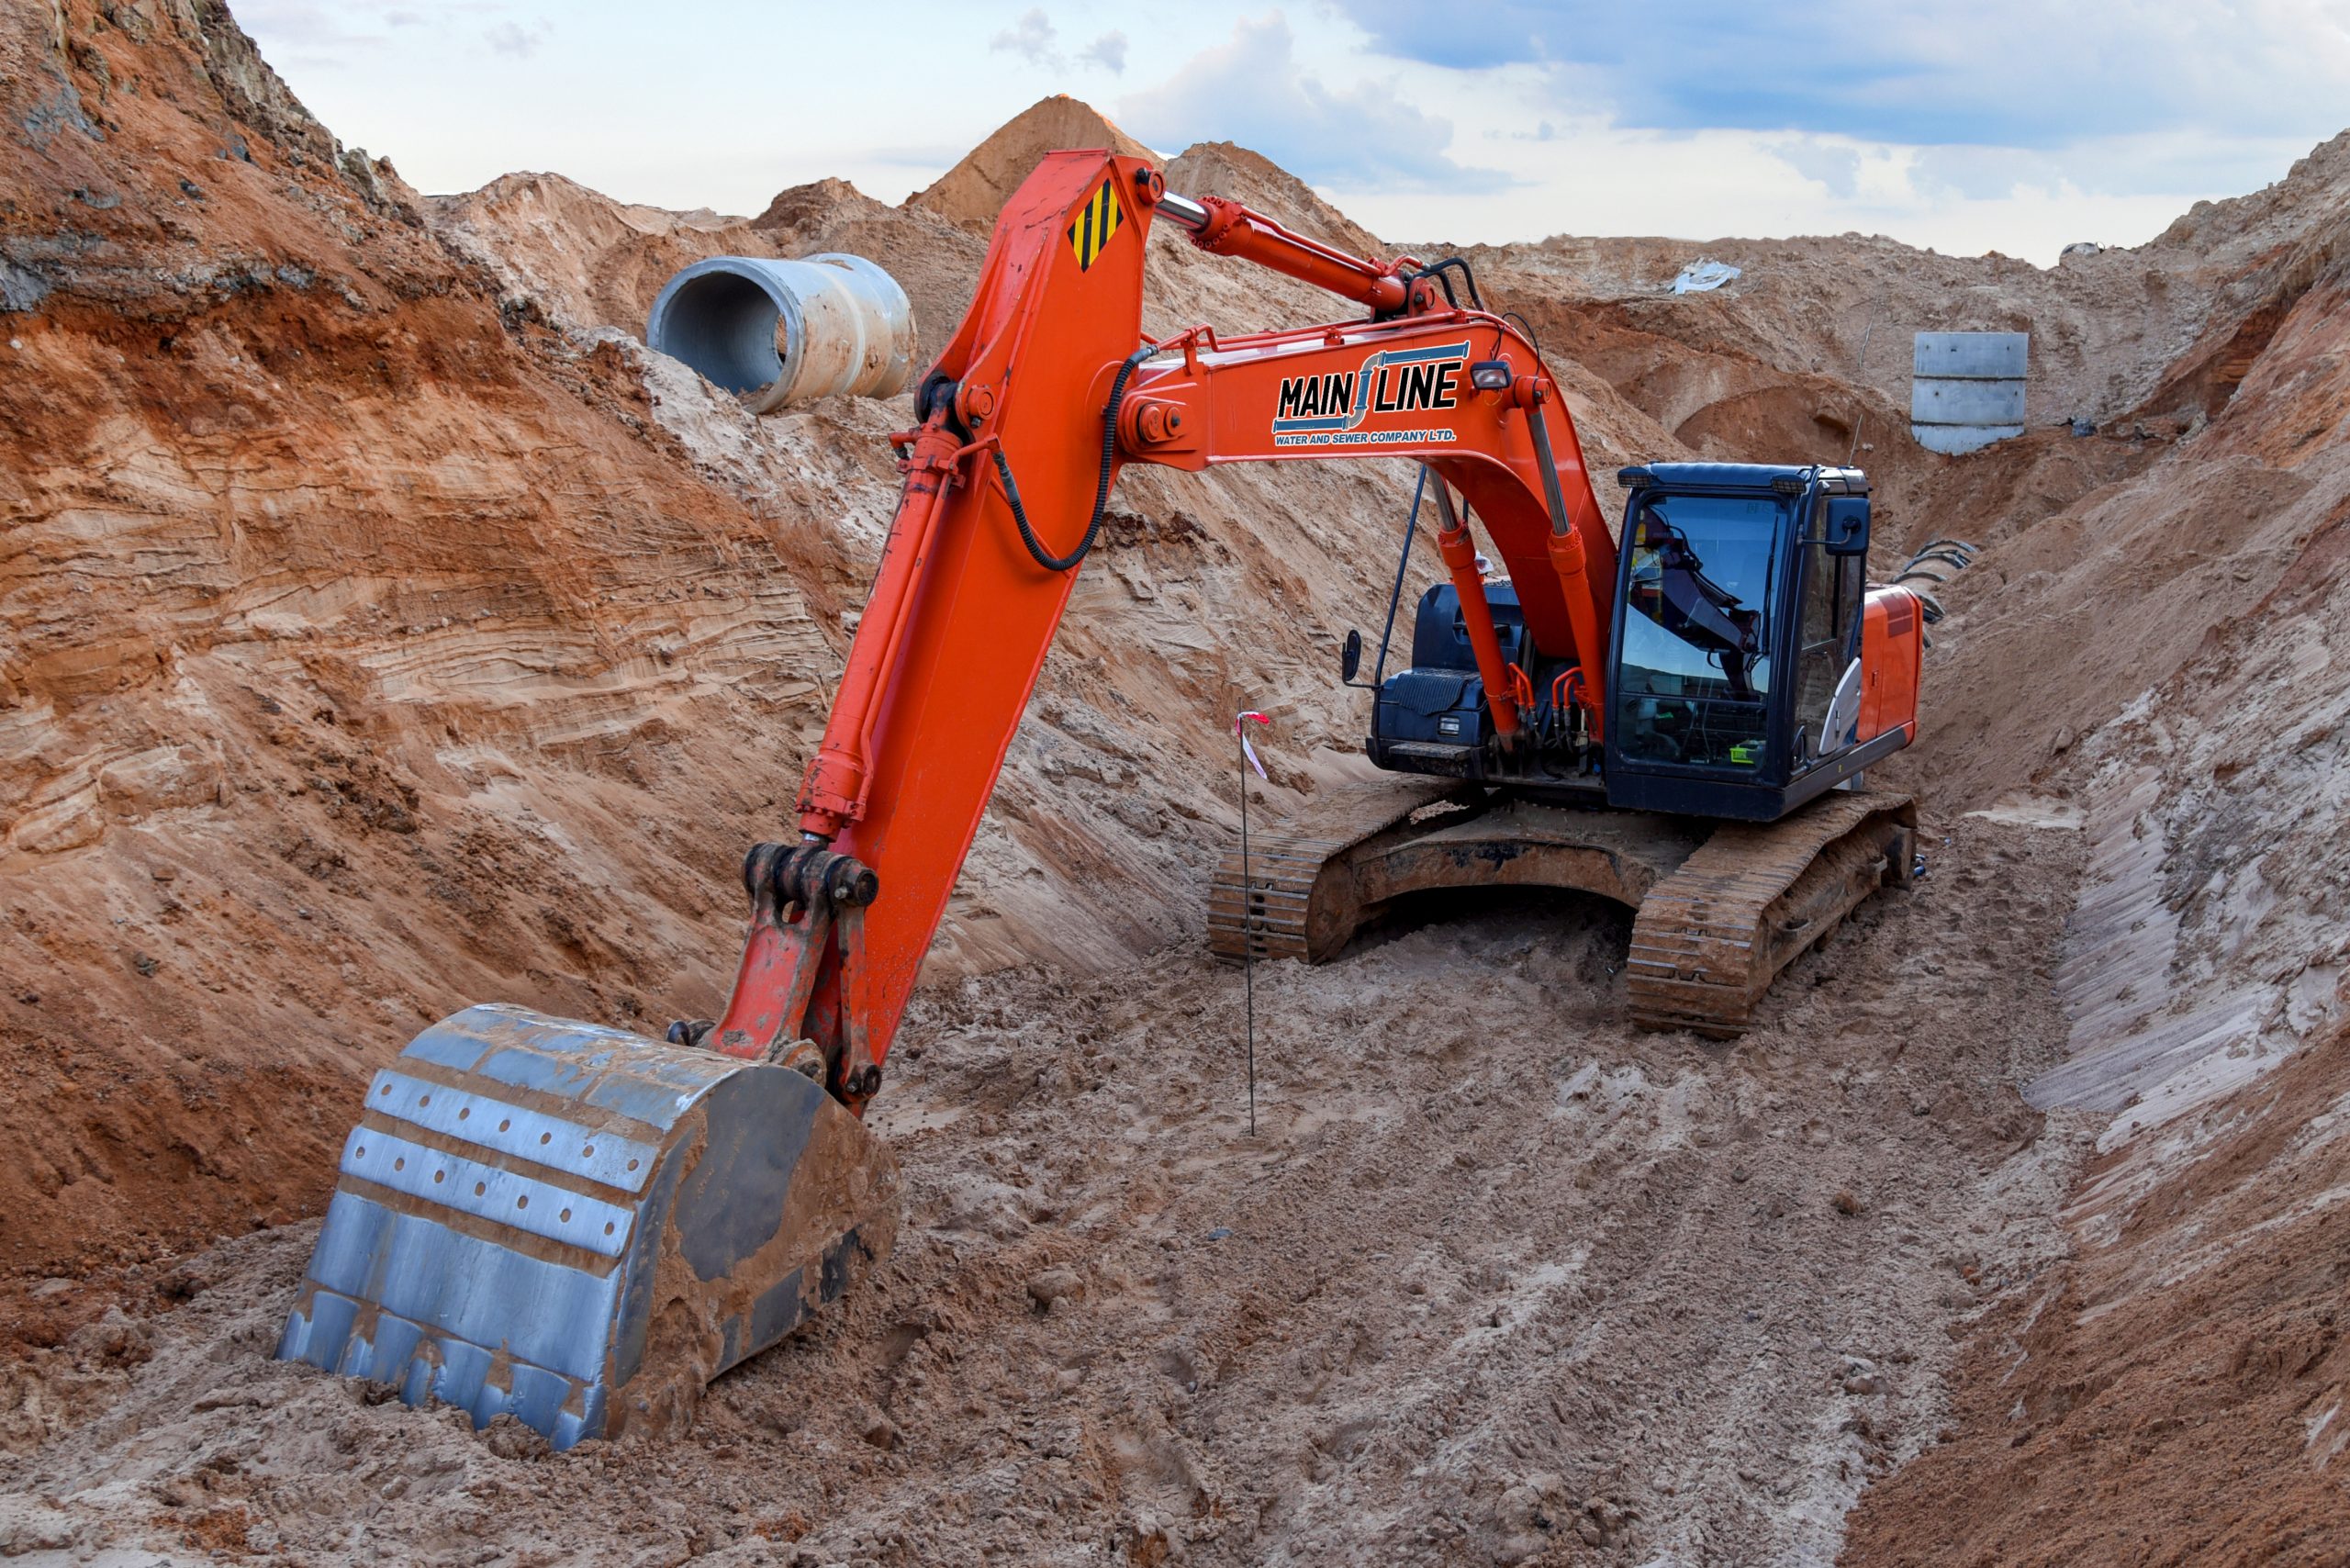 Excavator,Working,At,A,Construction,Site,During,Laying,Or,Replacement